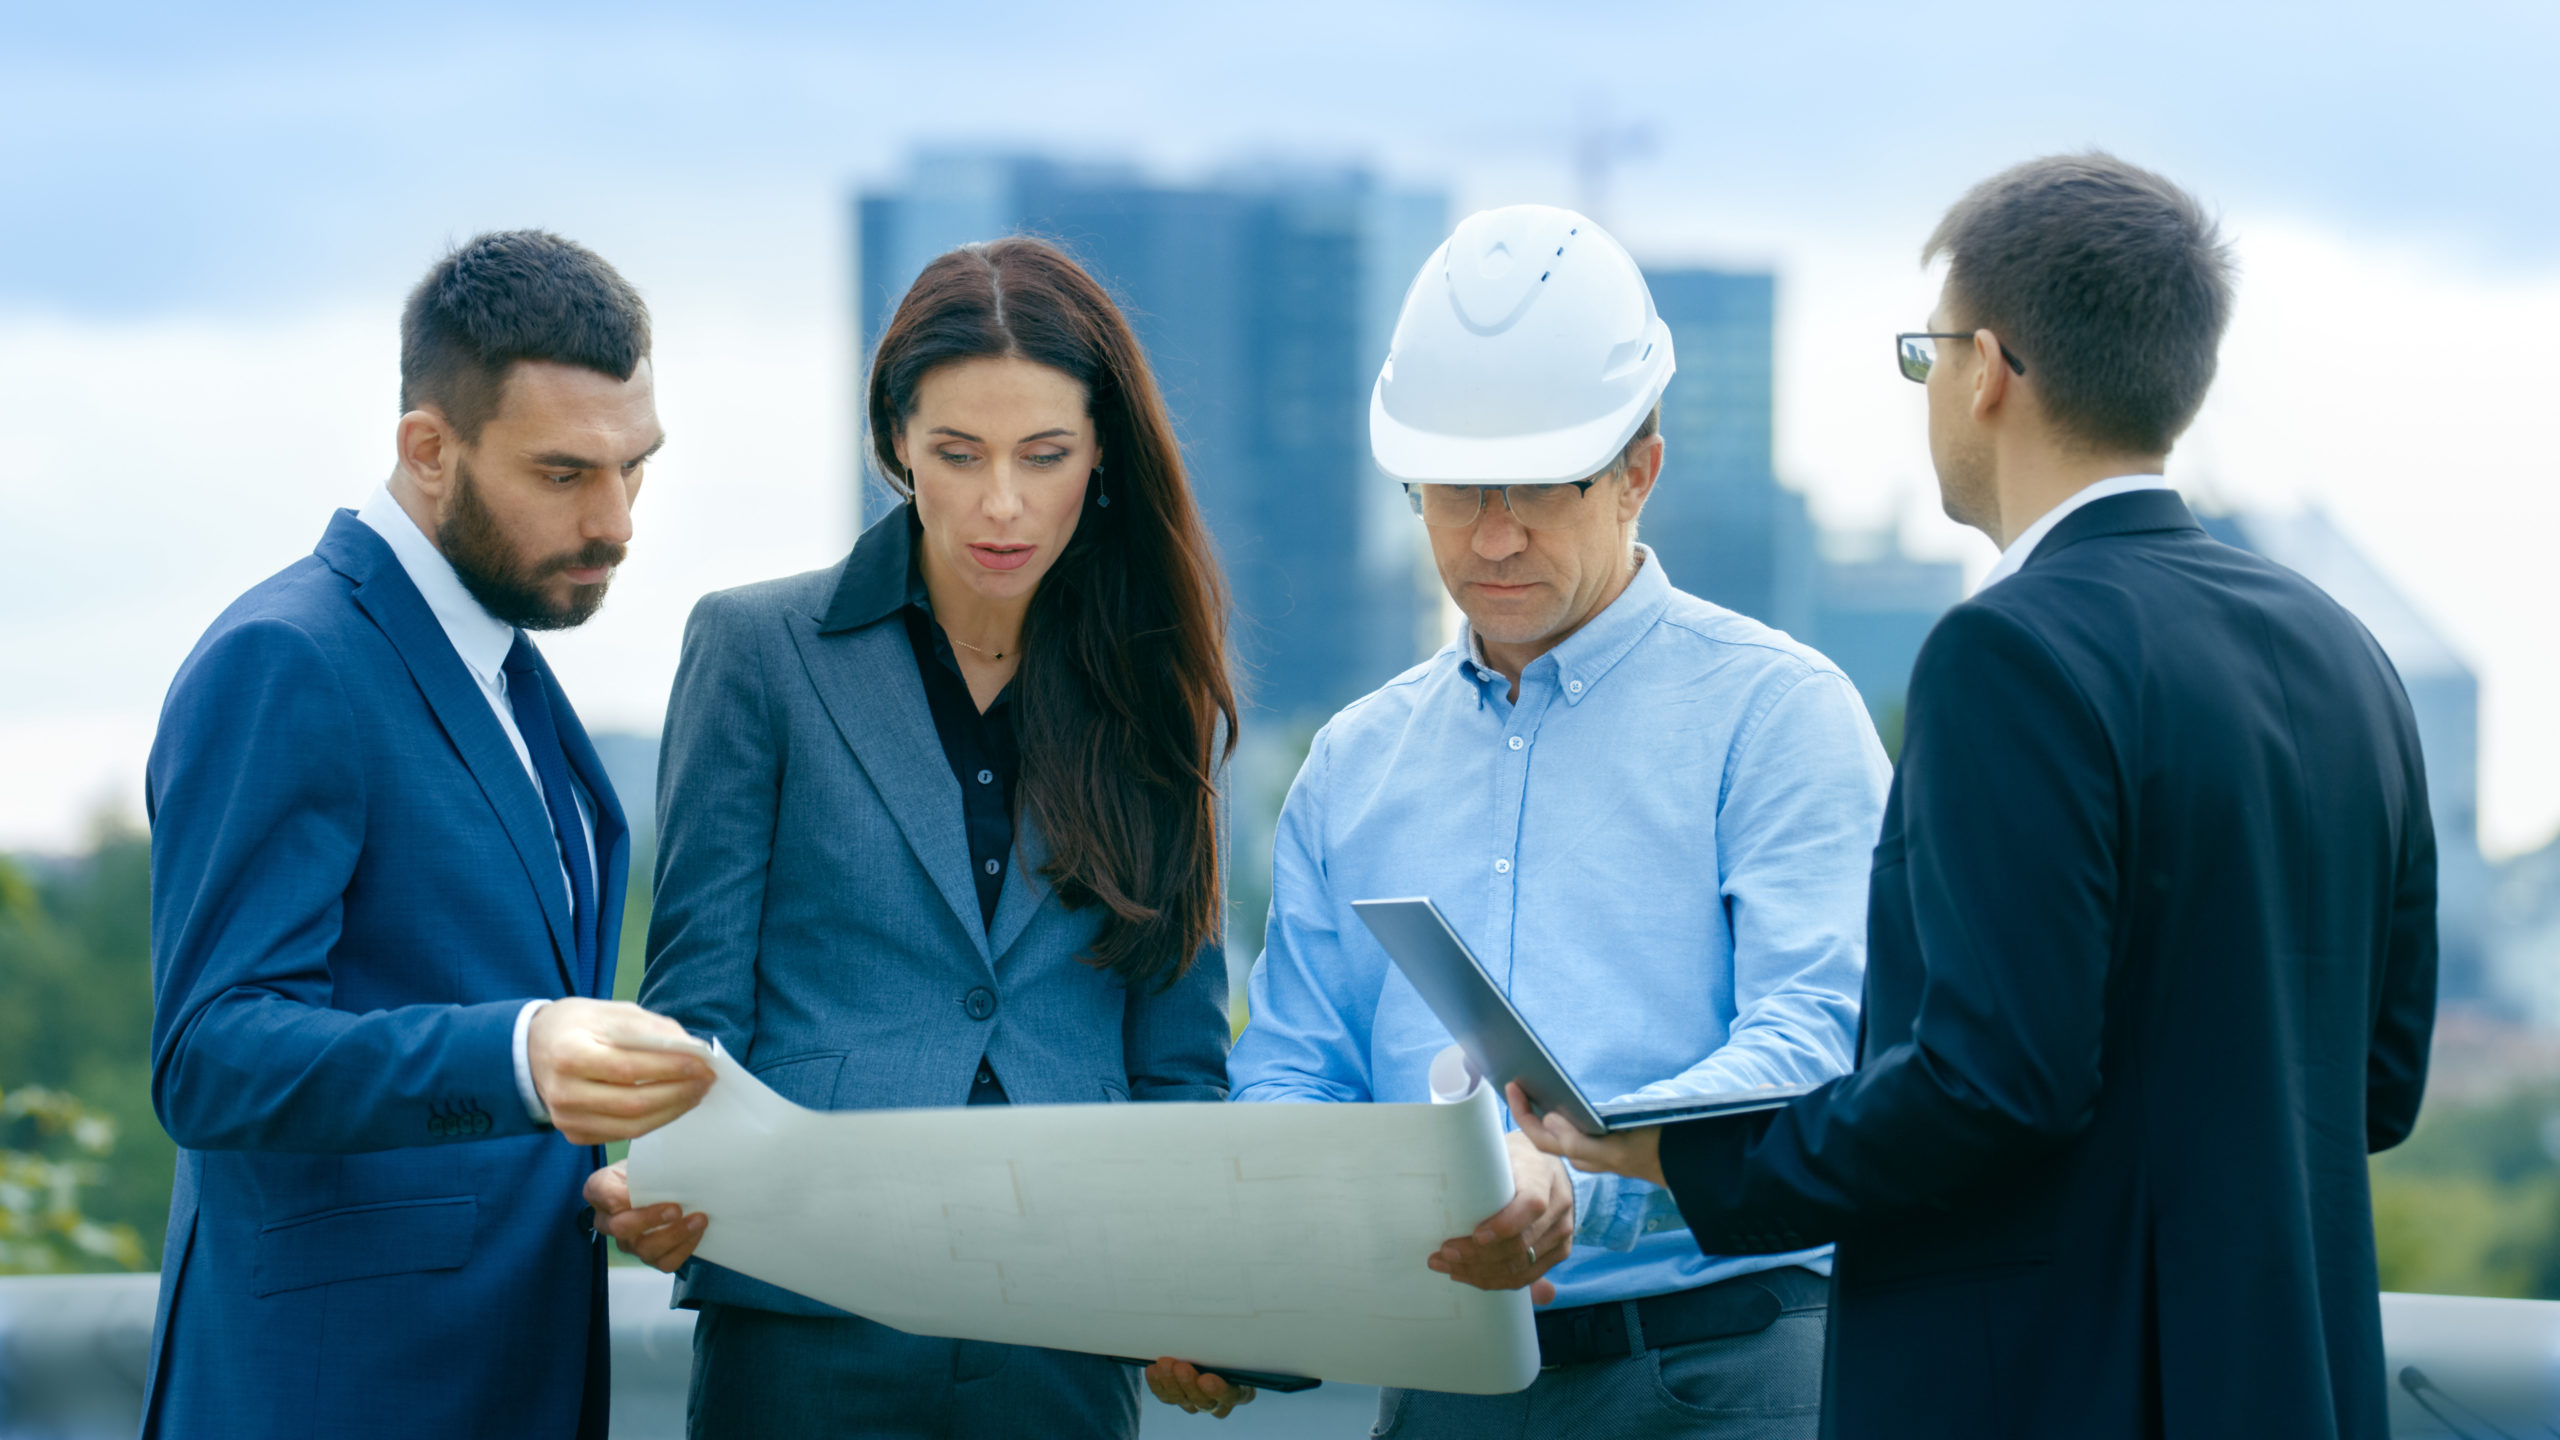 Real estate developer, general contractor, property manager, and investor holding laptop computer review blueprints at site.